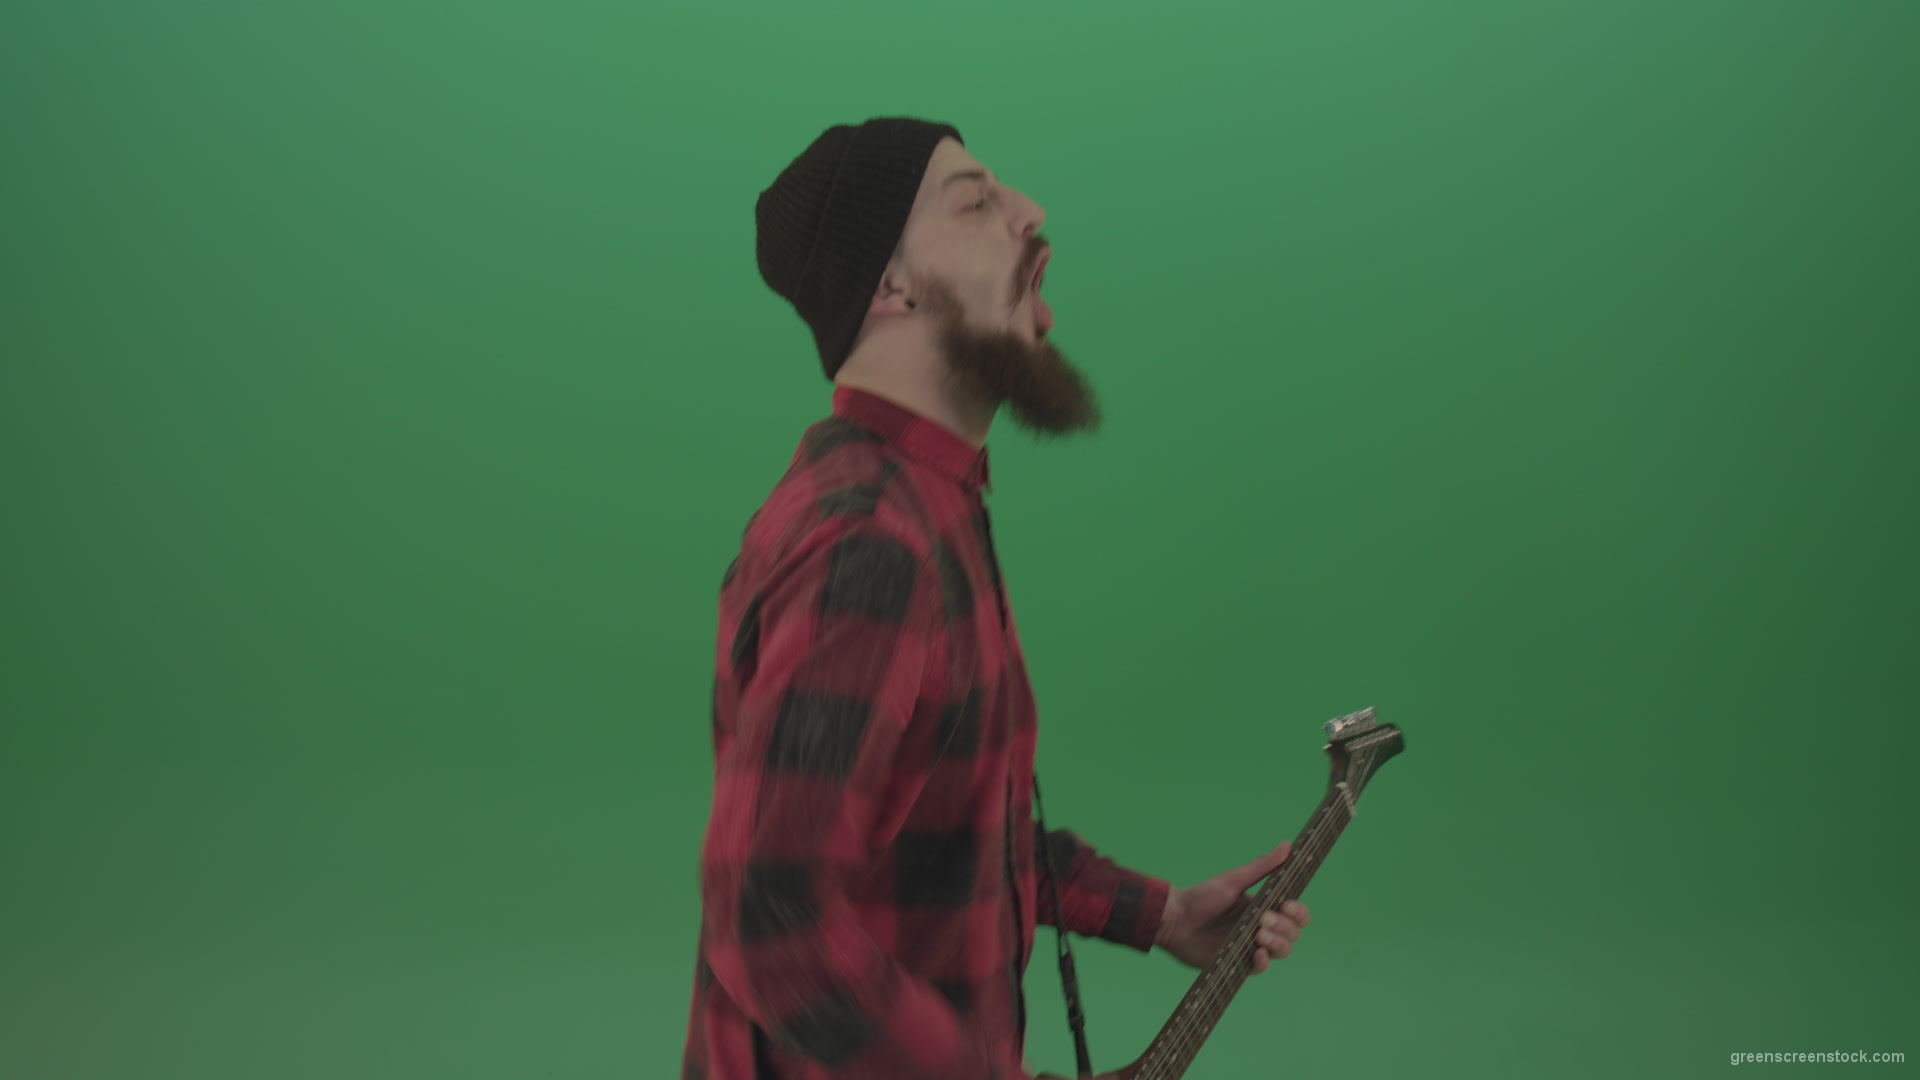 Angry-punk-rock-man-guitarist-play-guitar-and-scream-death-hardcore-music-isolated-on-green-screen_007 Green Screen Stock